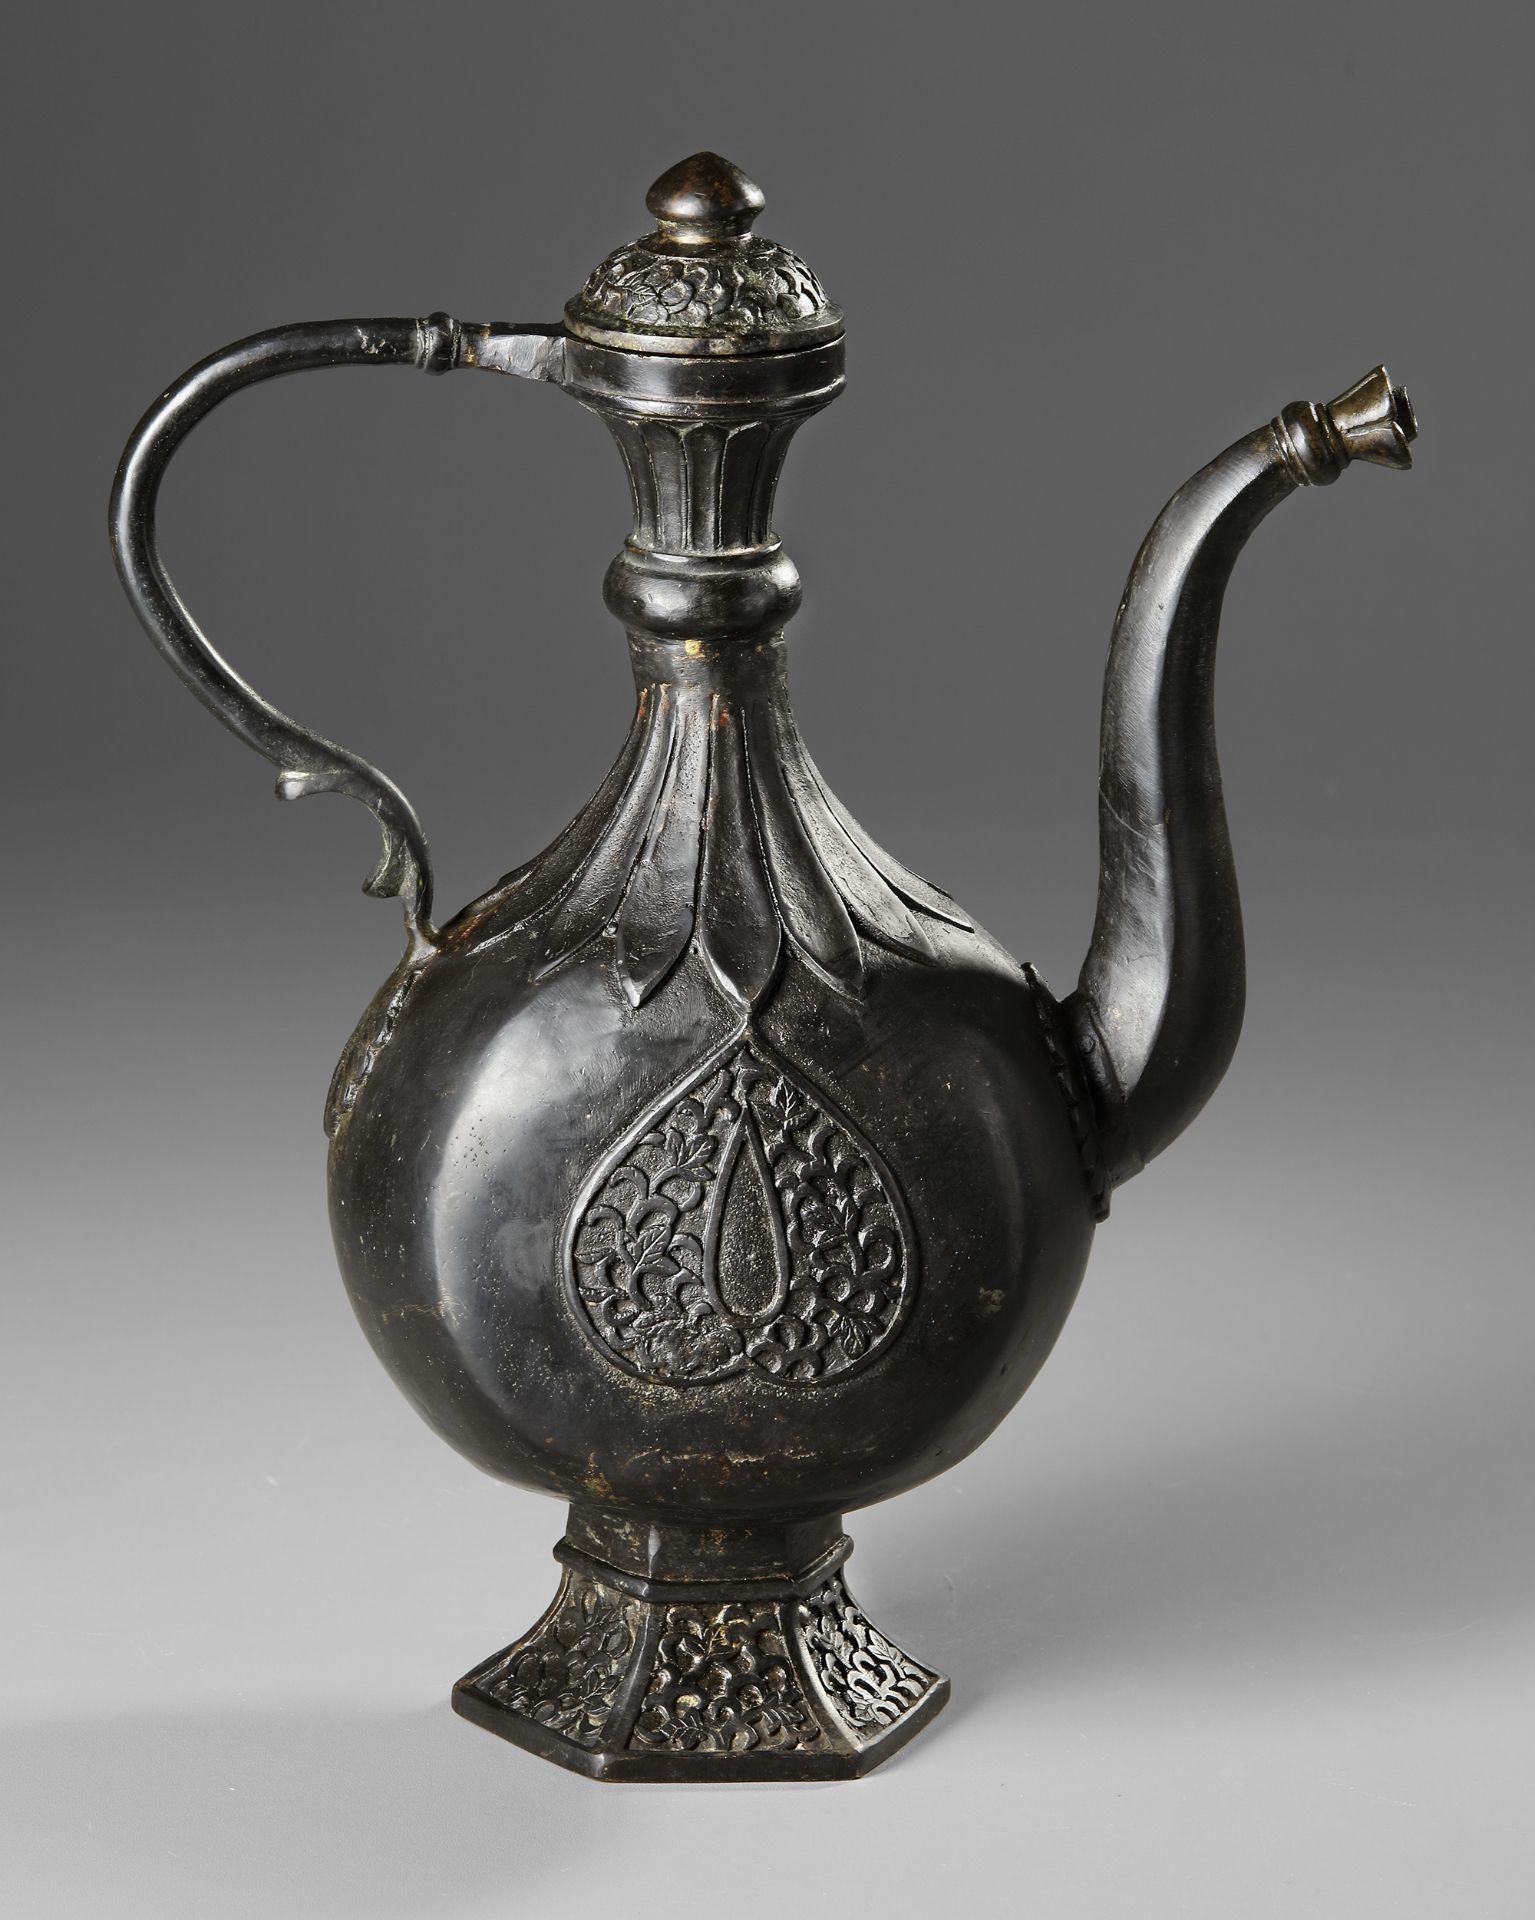 A DECCANI CAST BRASS EWER, INDIA, 17TH CENTURY OR LATER - Image 2 of 4